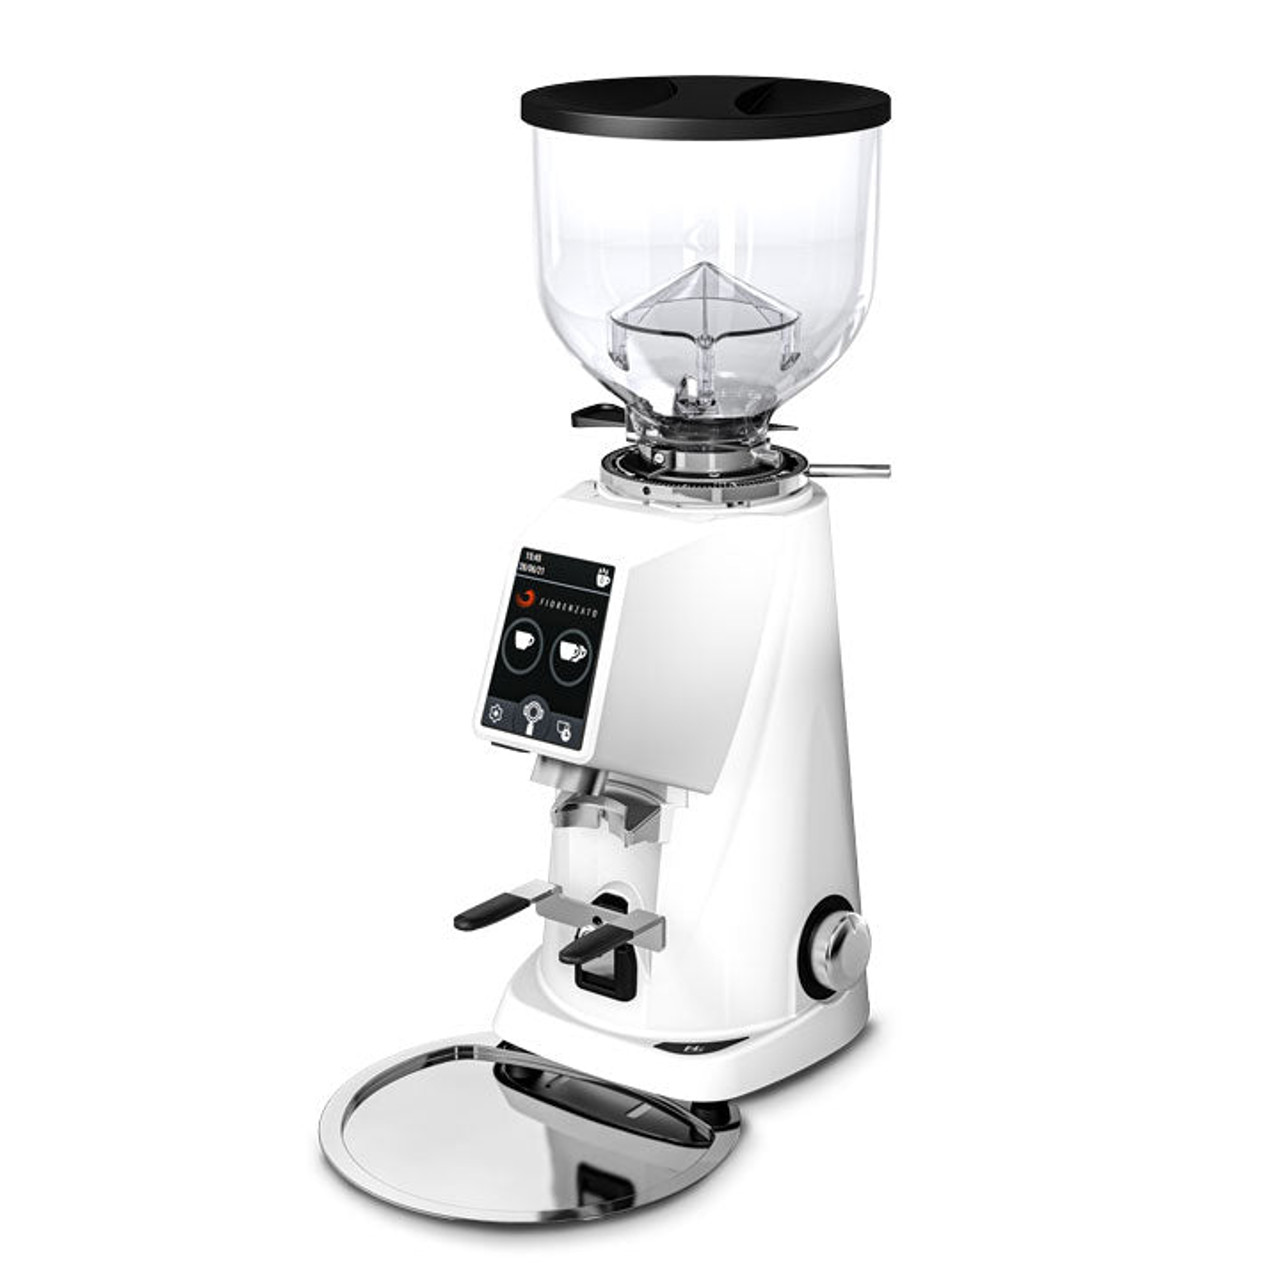 The Upgraded Chemex Ottomatic Was the Best Gift I Got in 2020